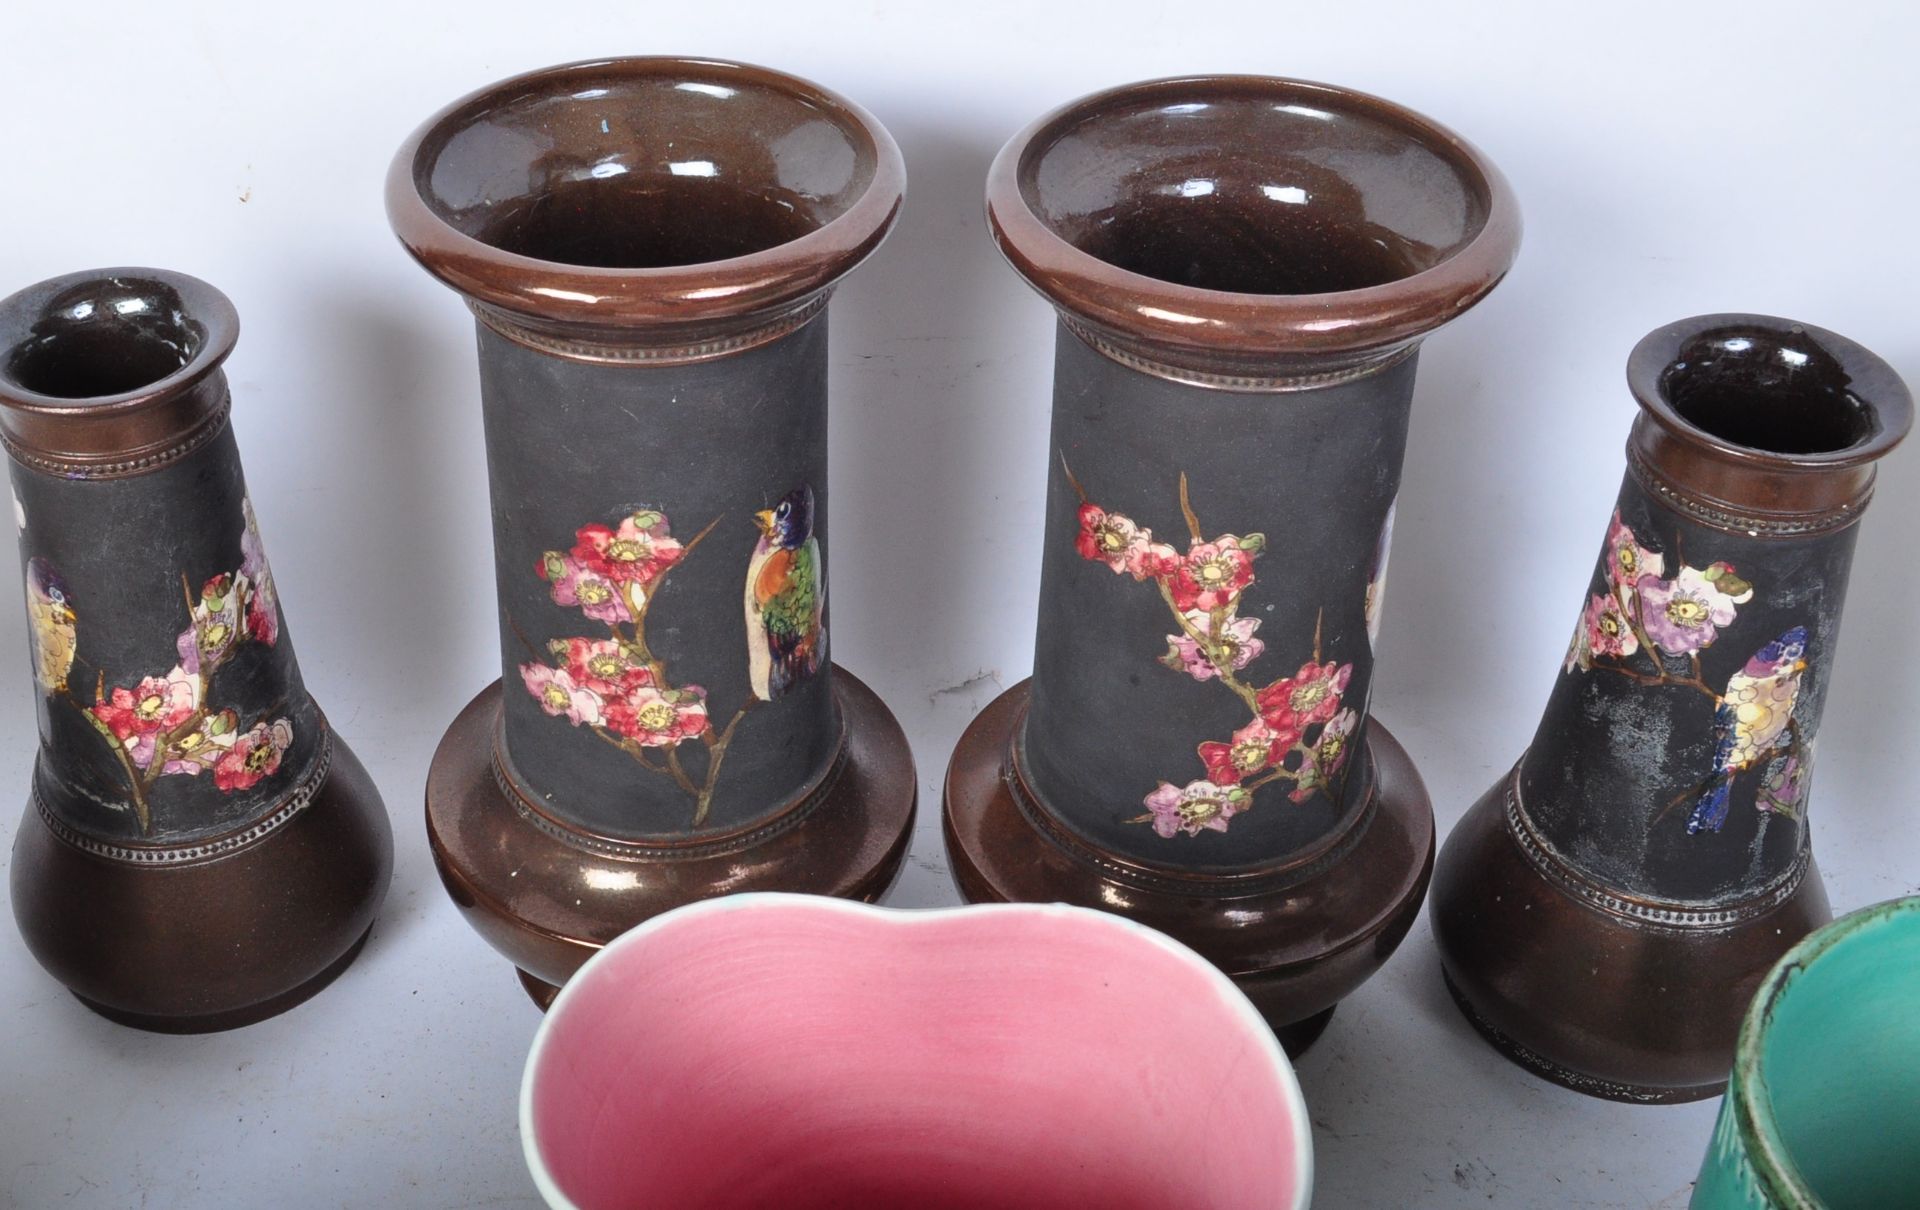 COLLECTION OF 1900S BRETBY POTTERY VASES - CLOISONNE WARE - Image 6 of 10